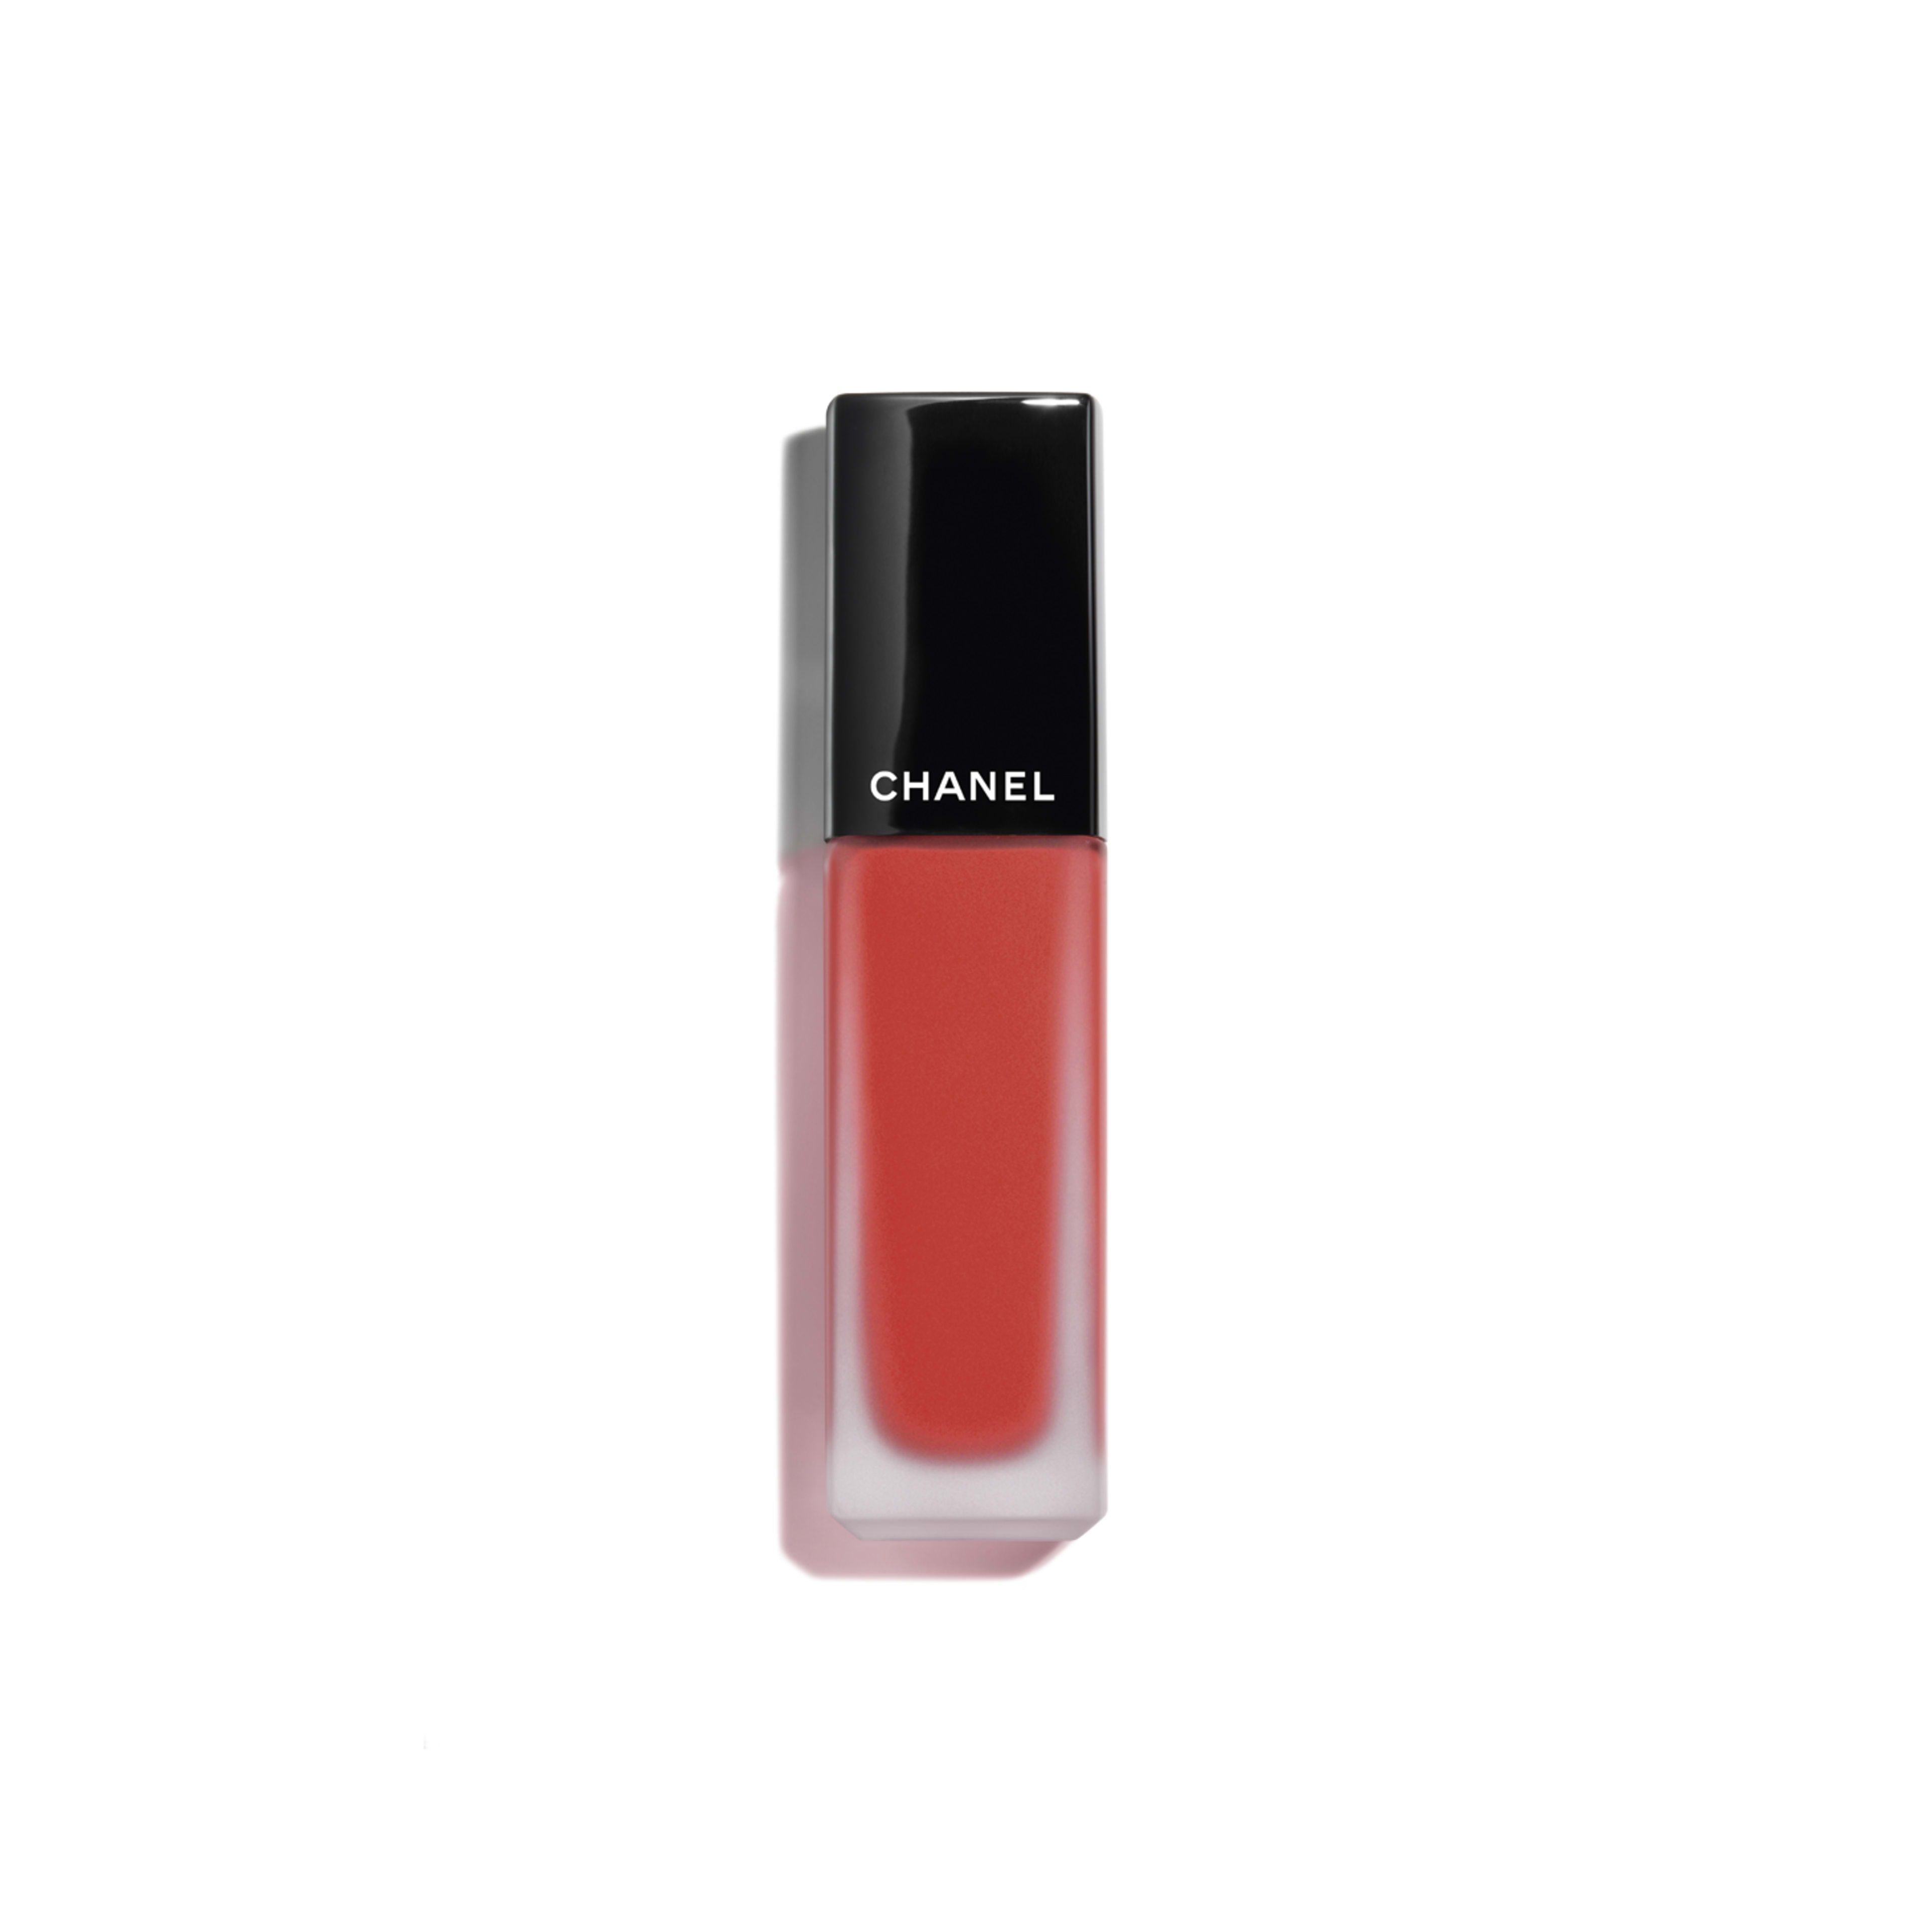 ROUGE ALLURE INK | Chanel, Inc. (US)